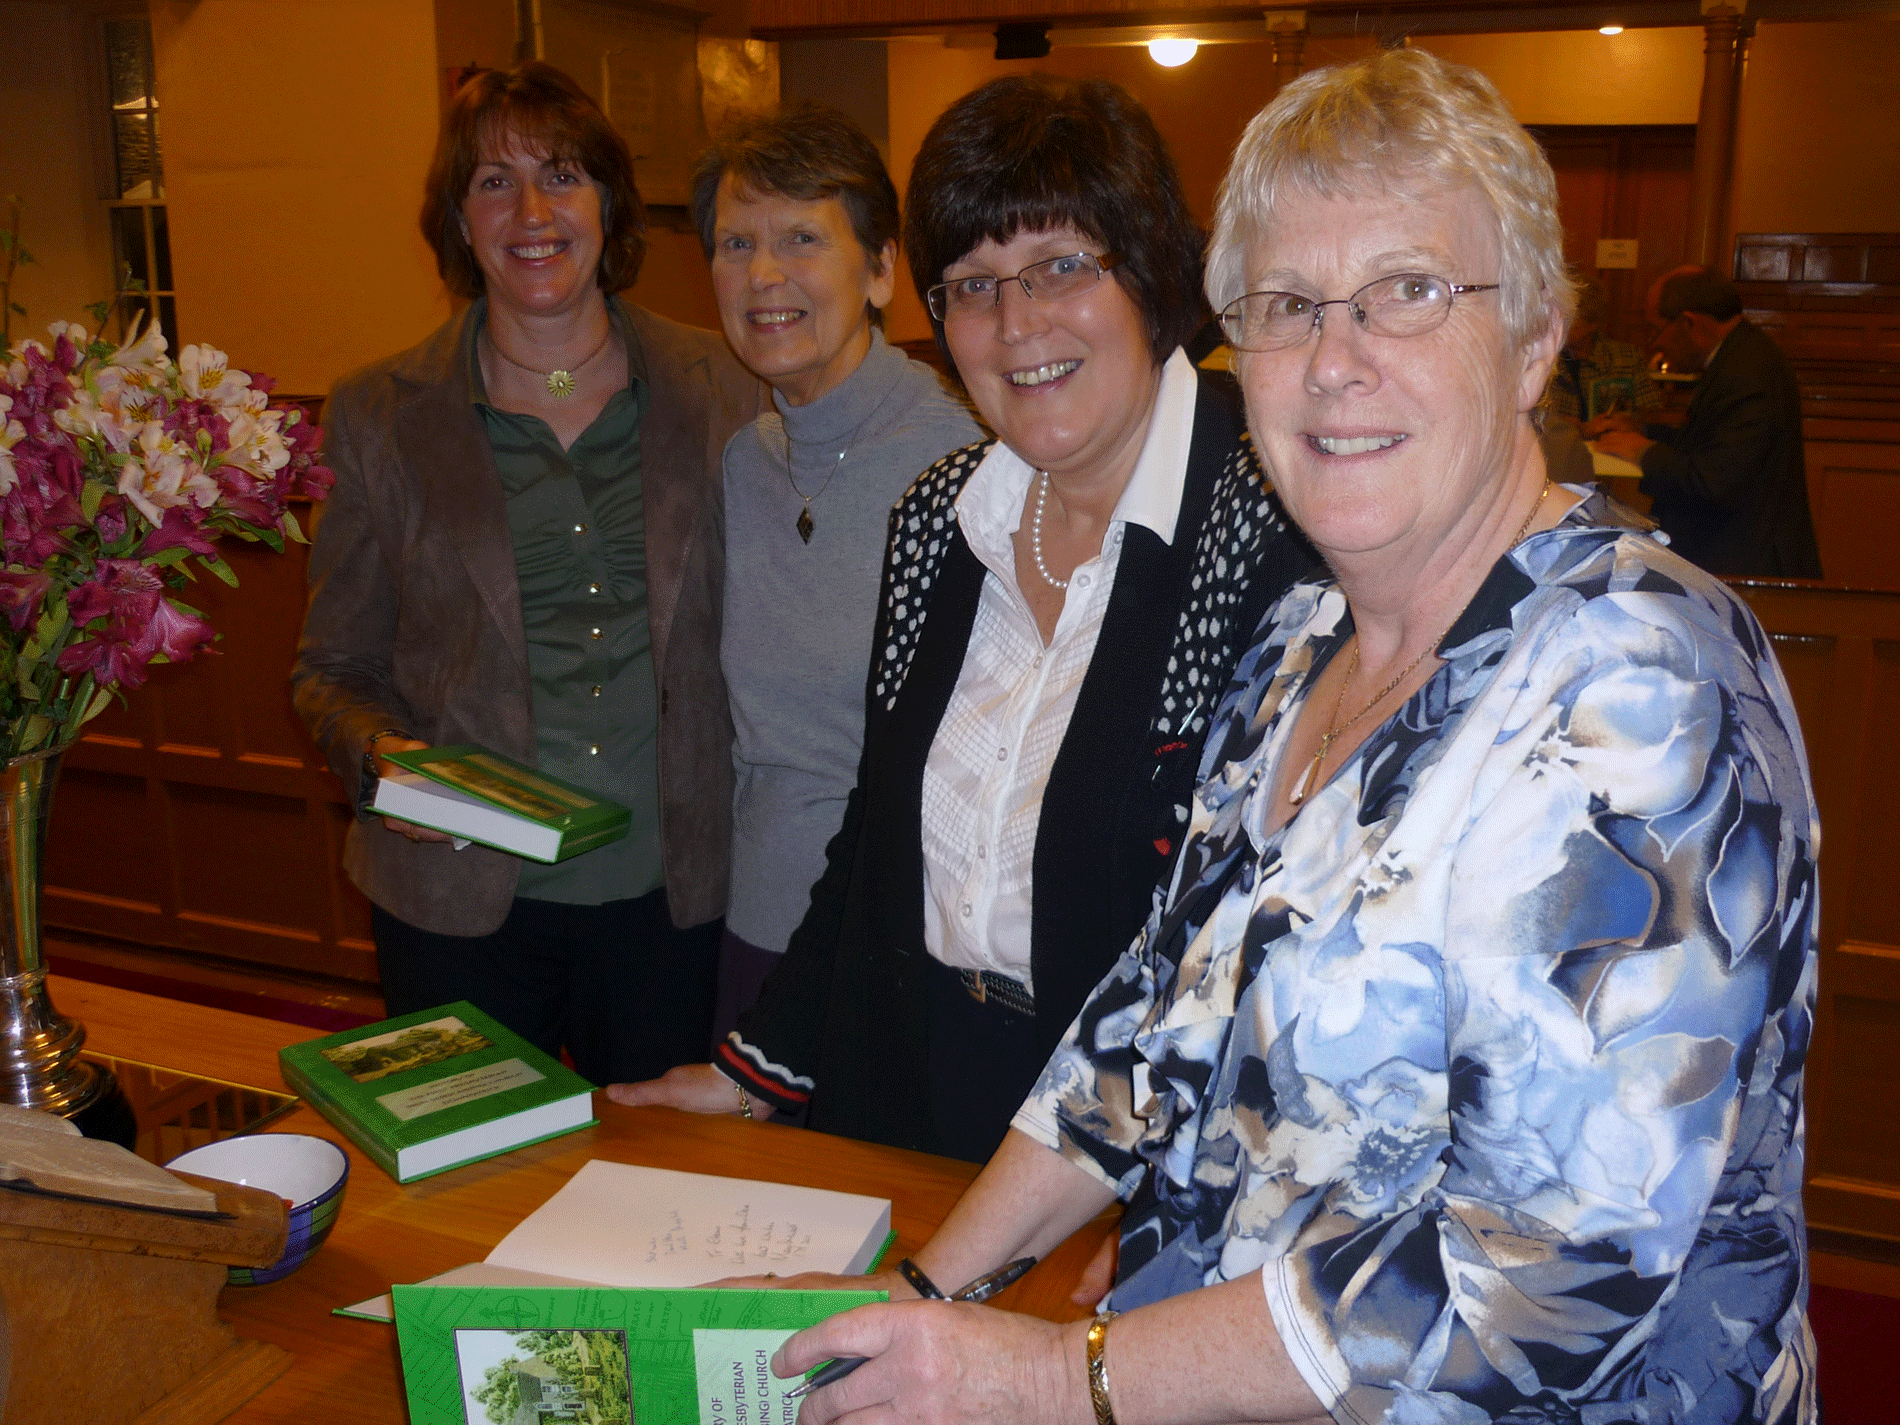 Mary signing her books for members of the congregation